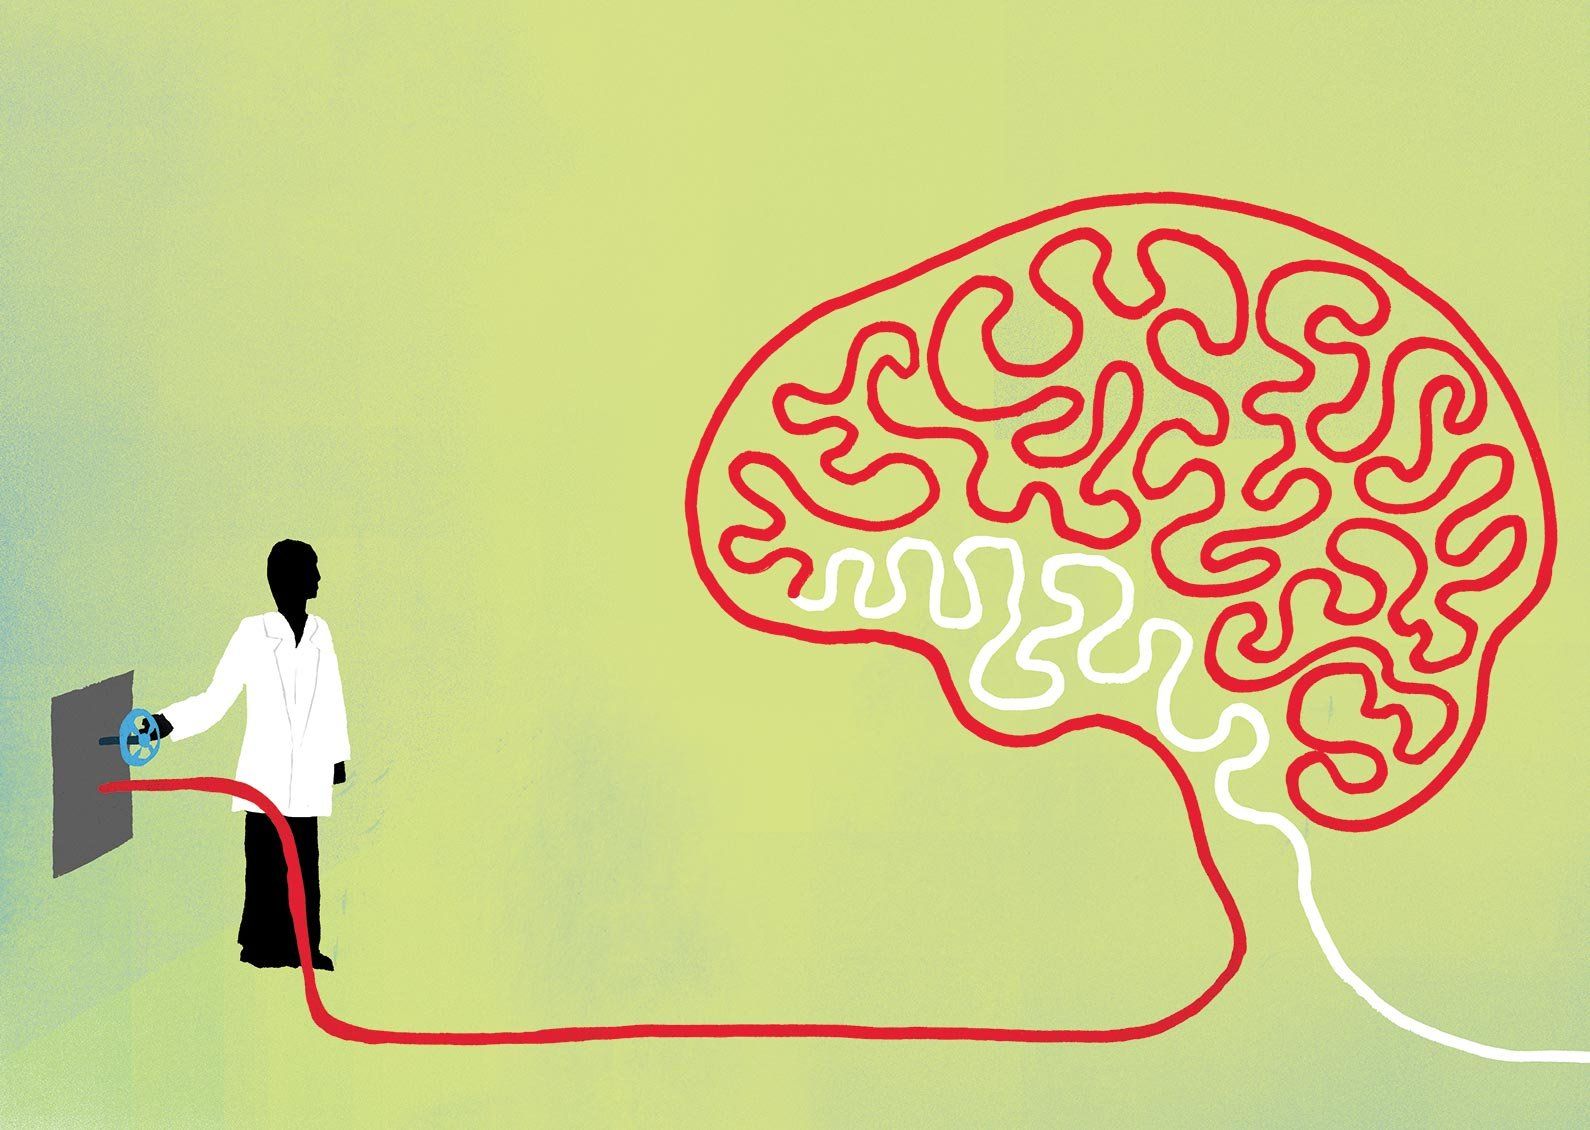 Illustration of a scientist "plugging in" a brain.